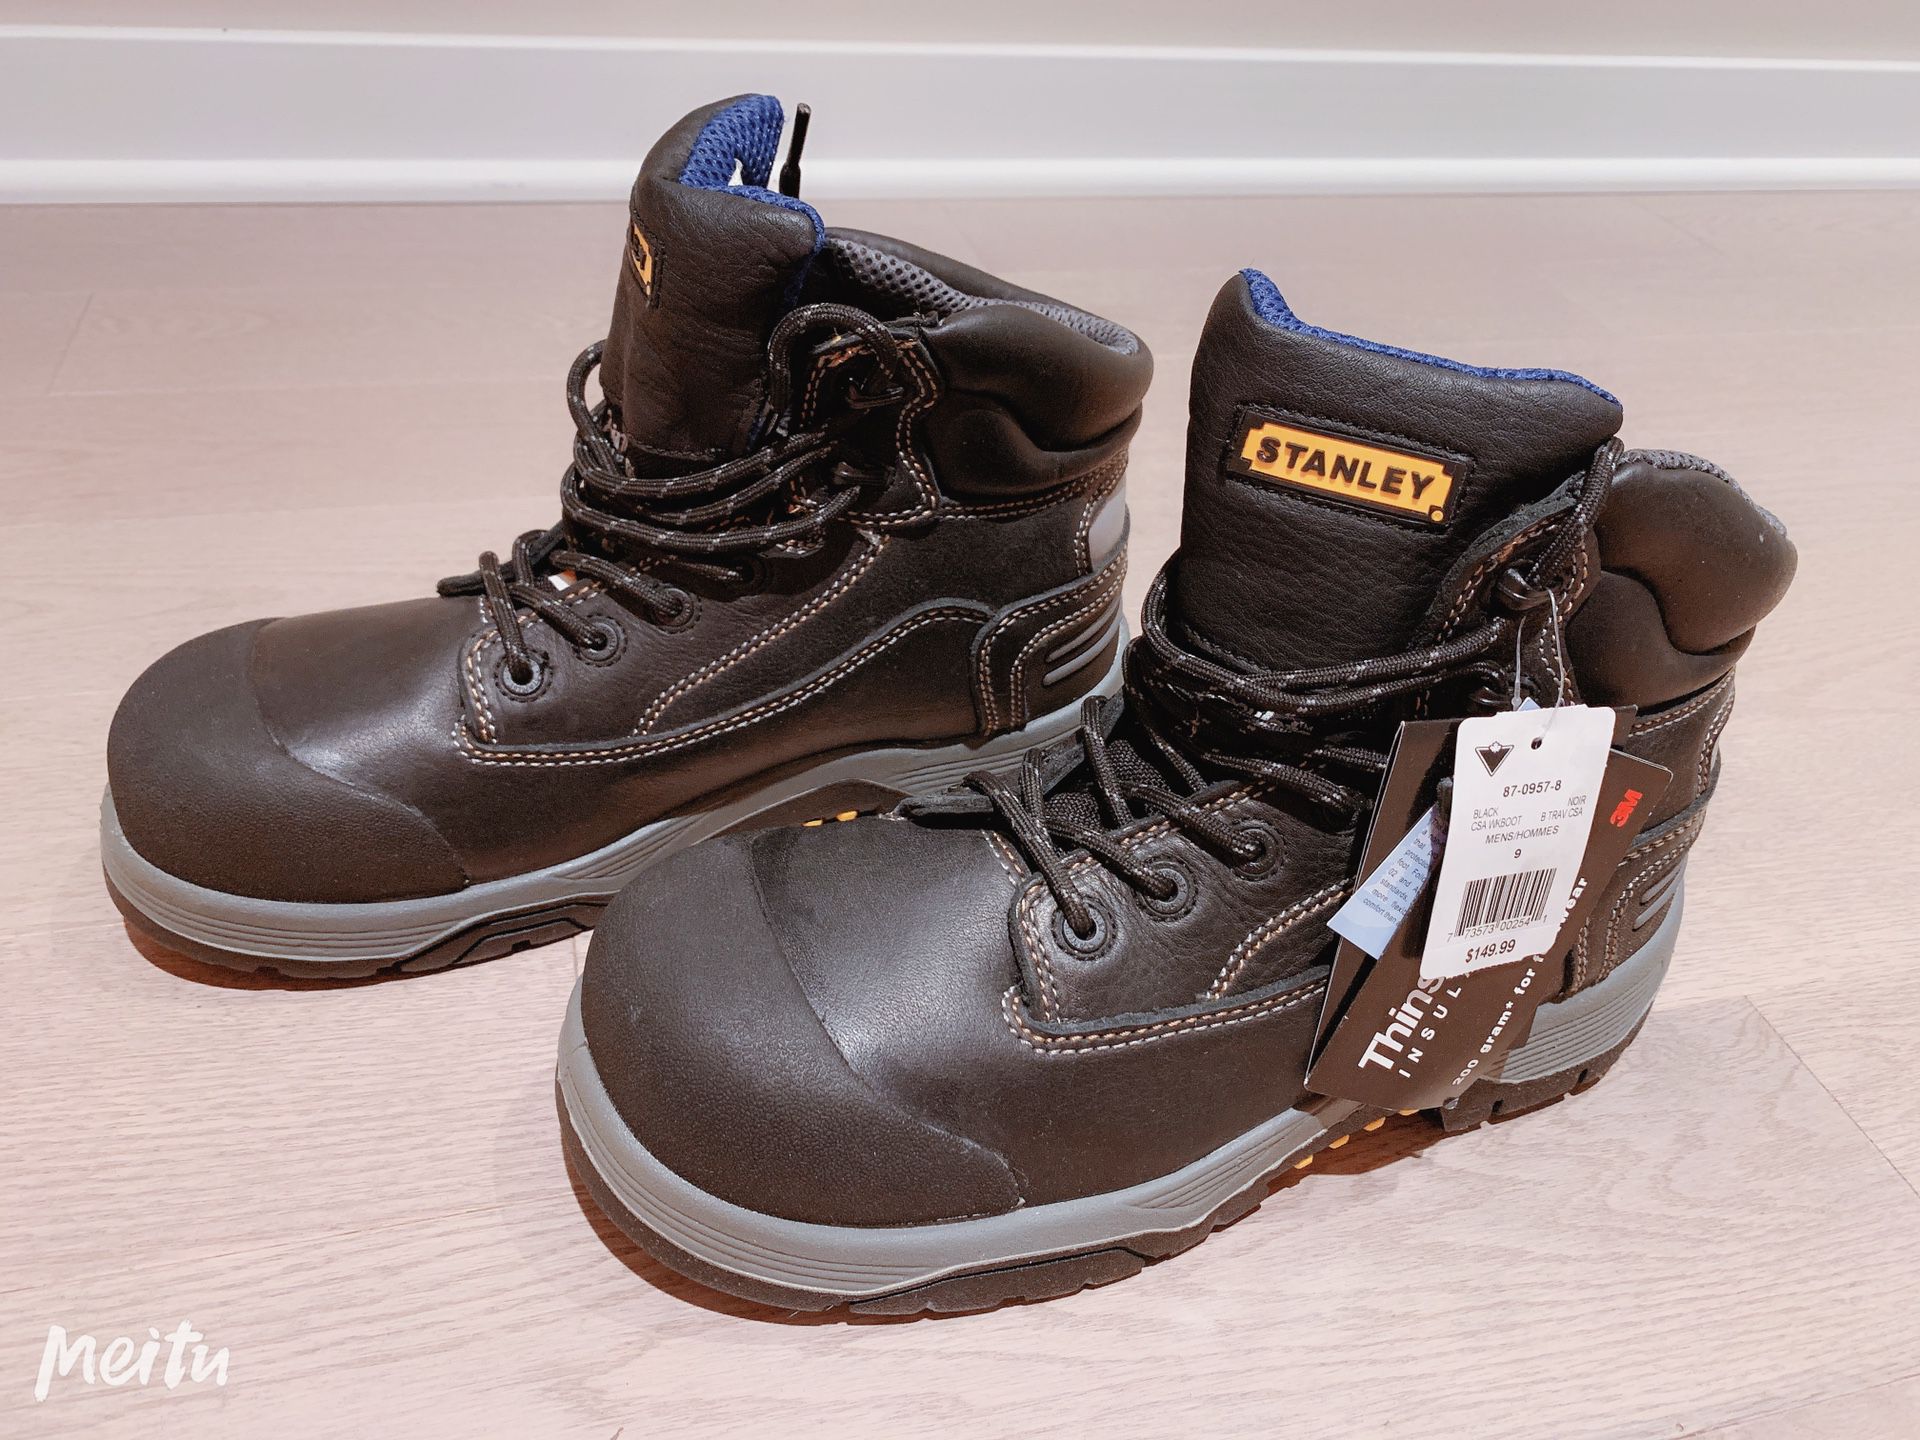 Brand new men’s safety work boots-size 9